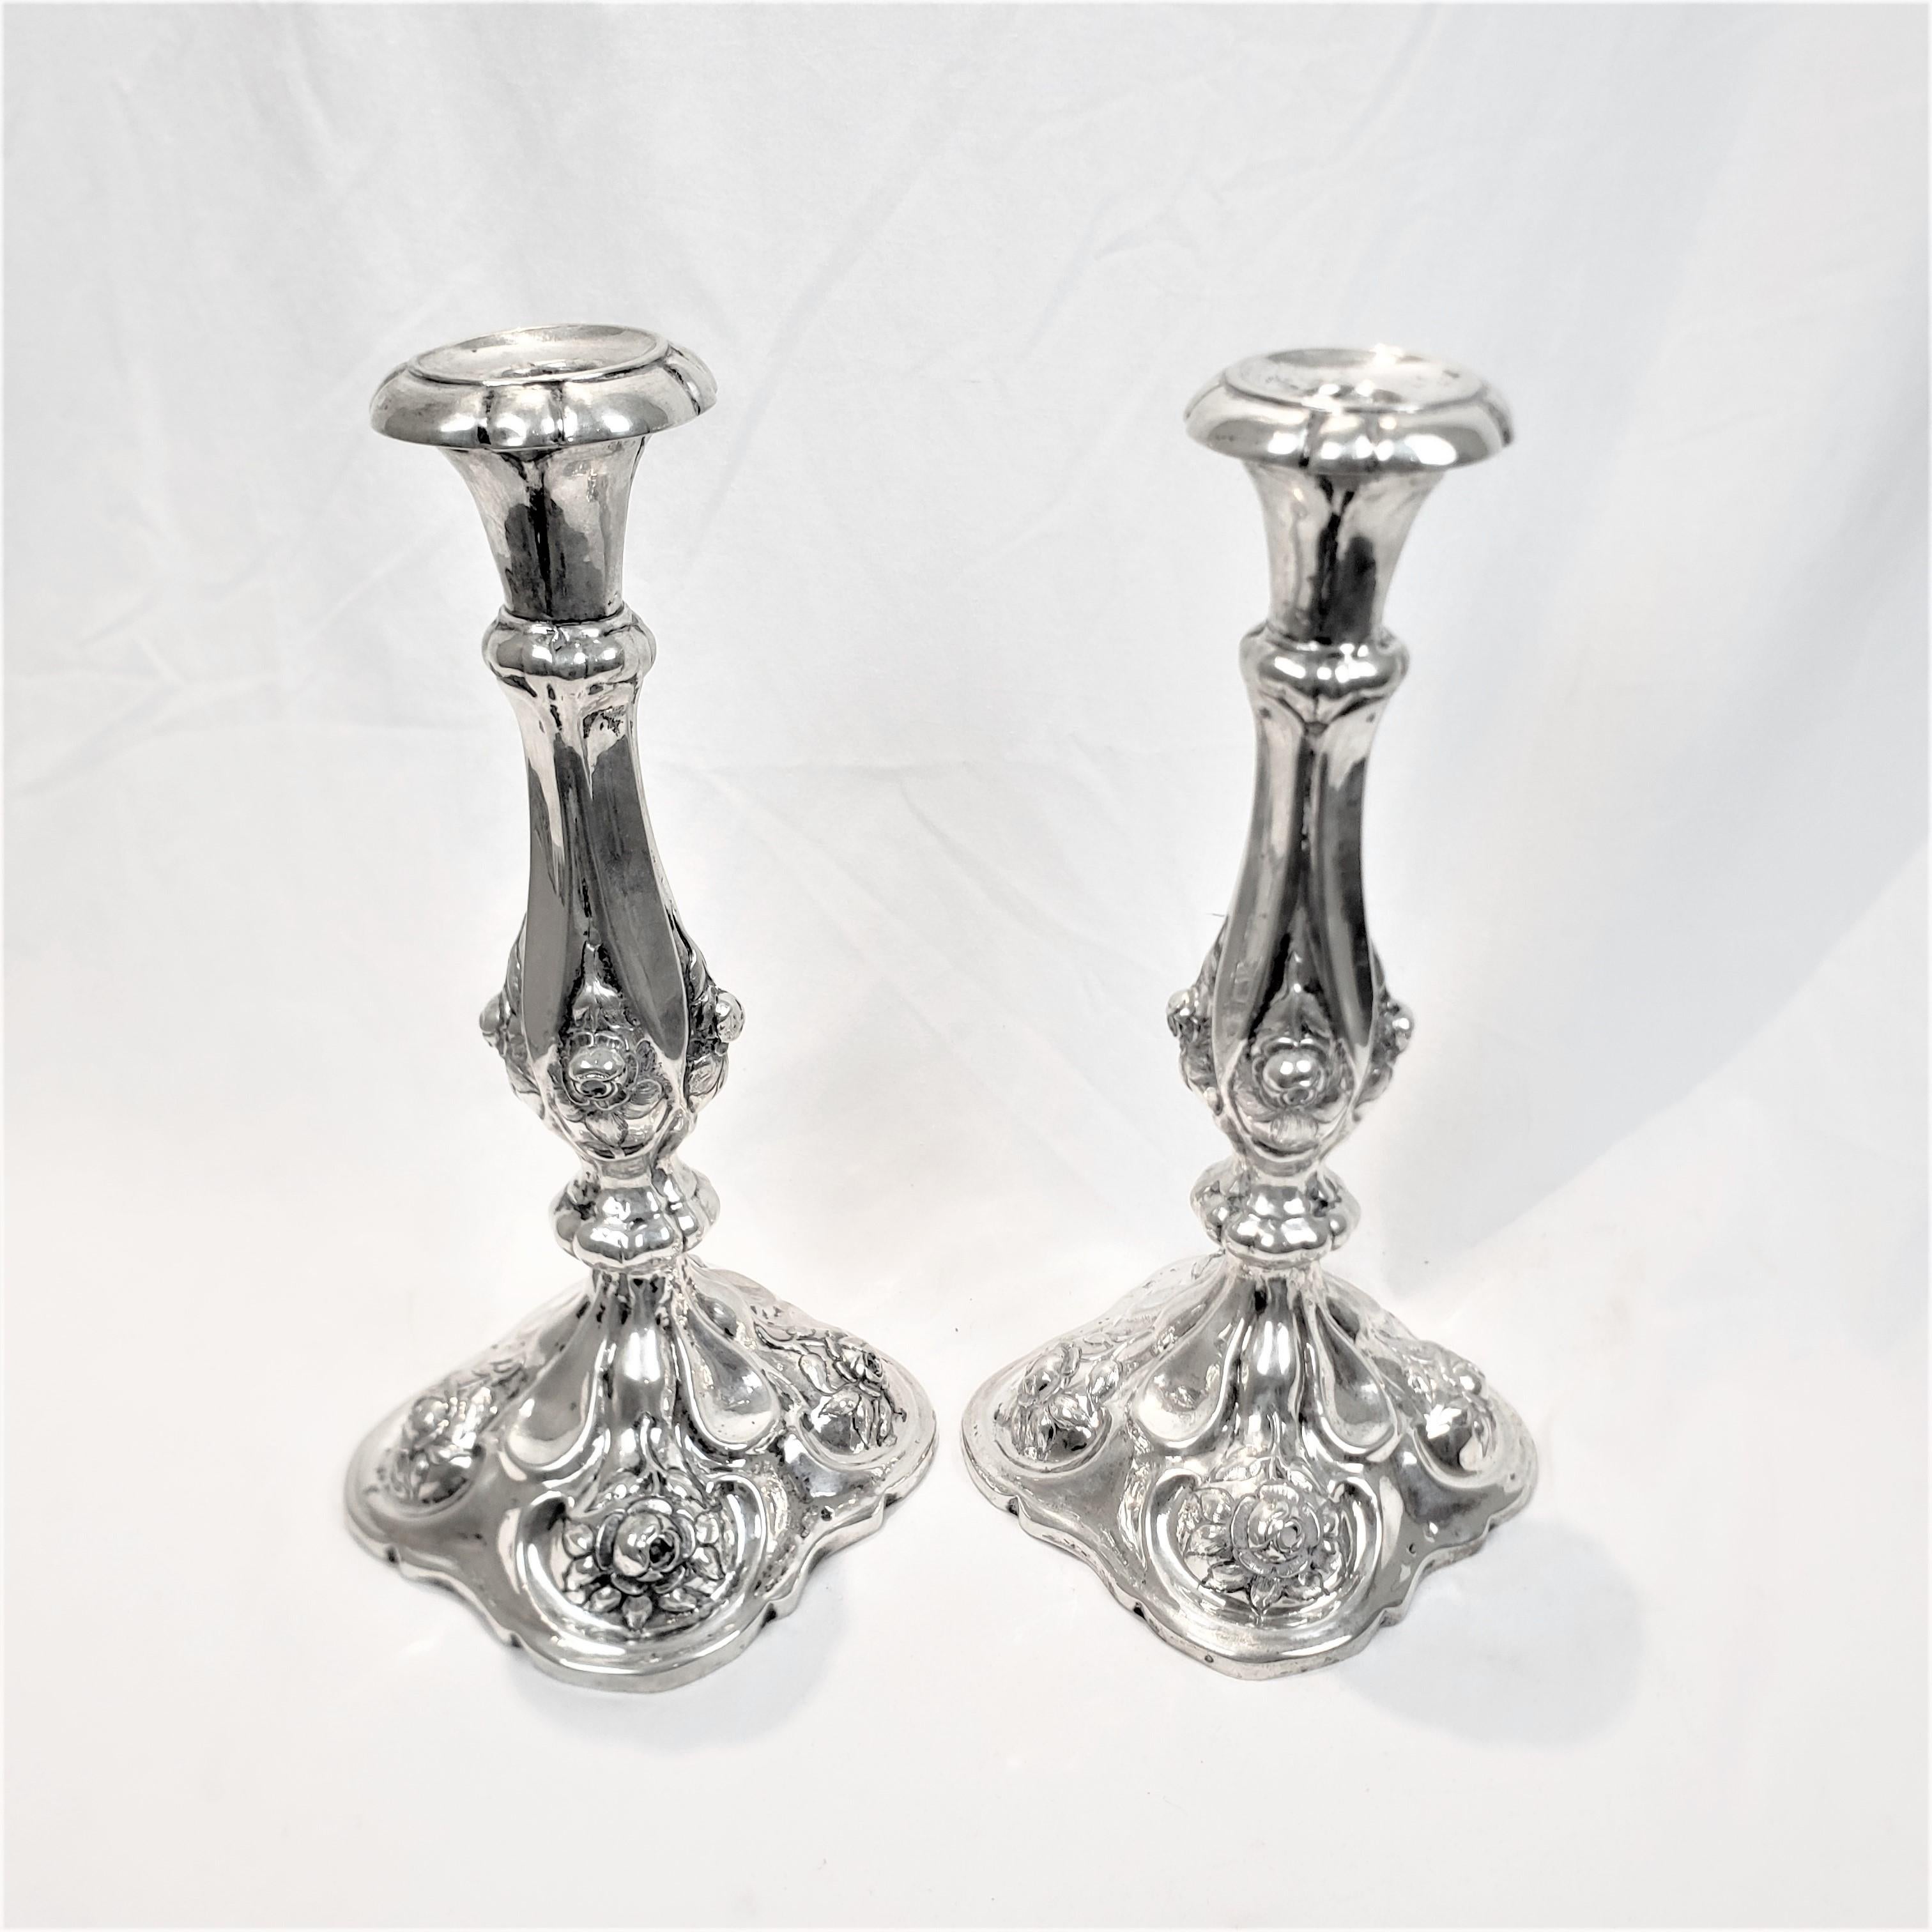 Pair of Antique Austro-Hungarian Silver Candlesticks with Chased Flowers In Good Condition For Sale In Hamilton, Ontario